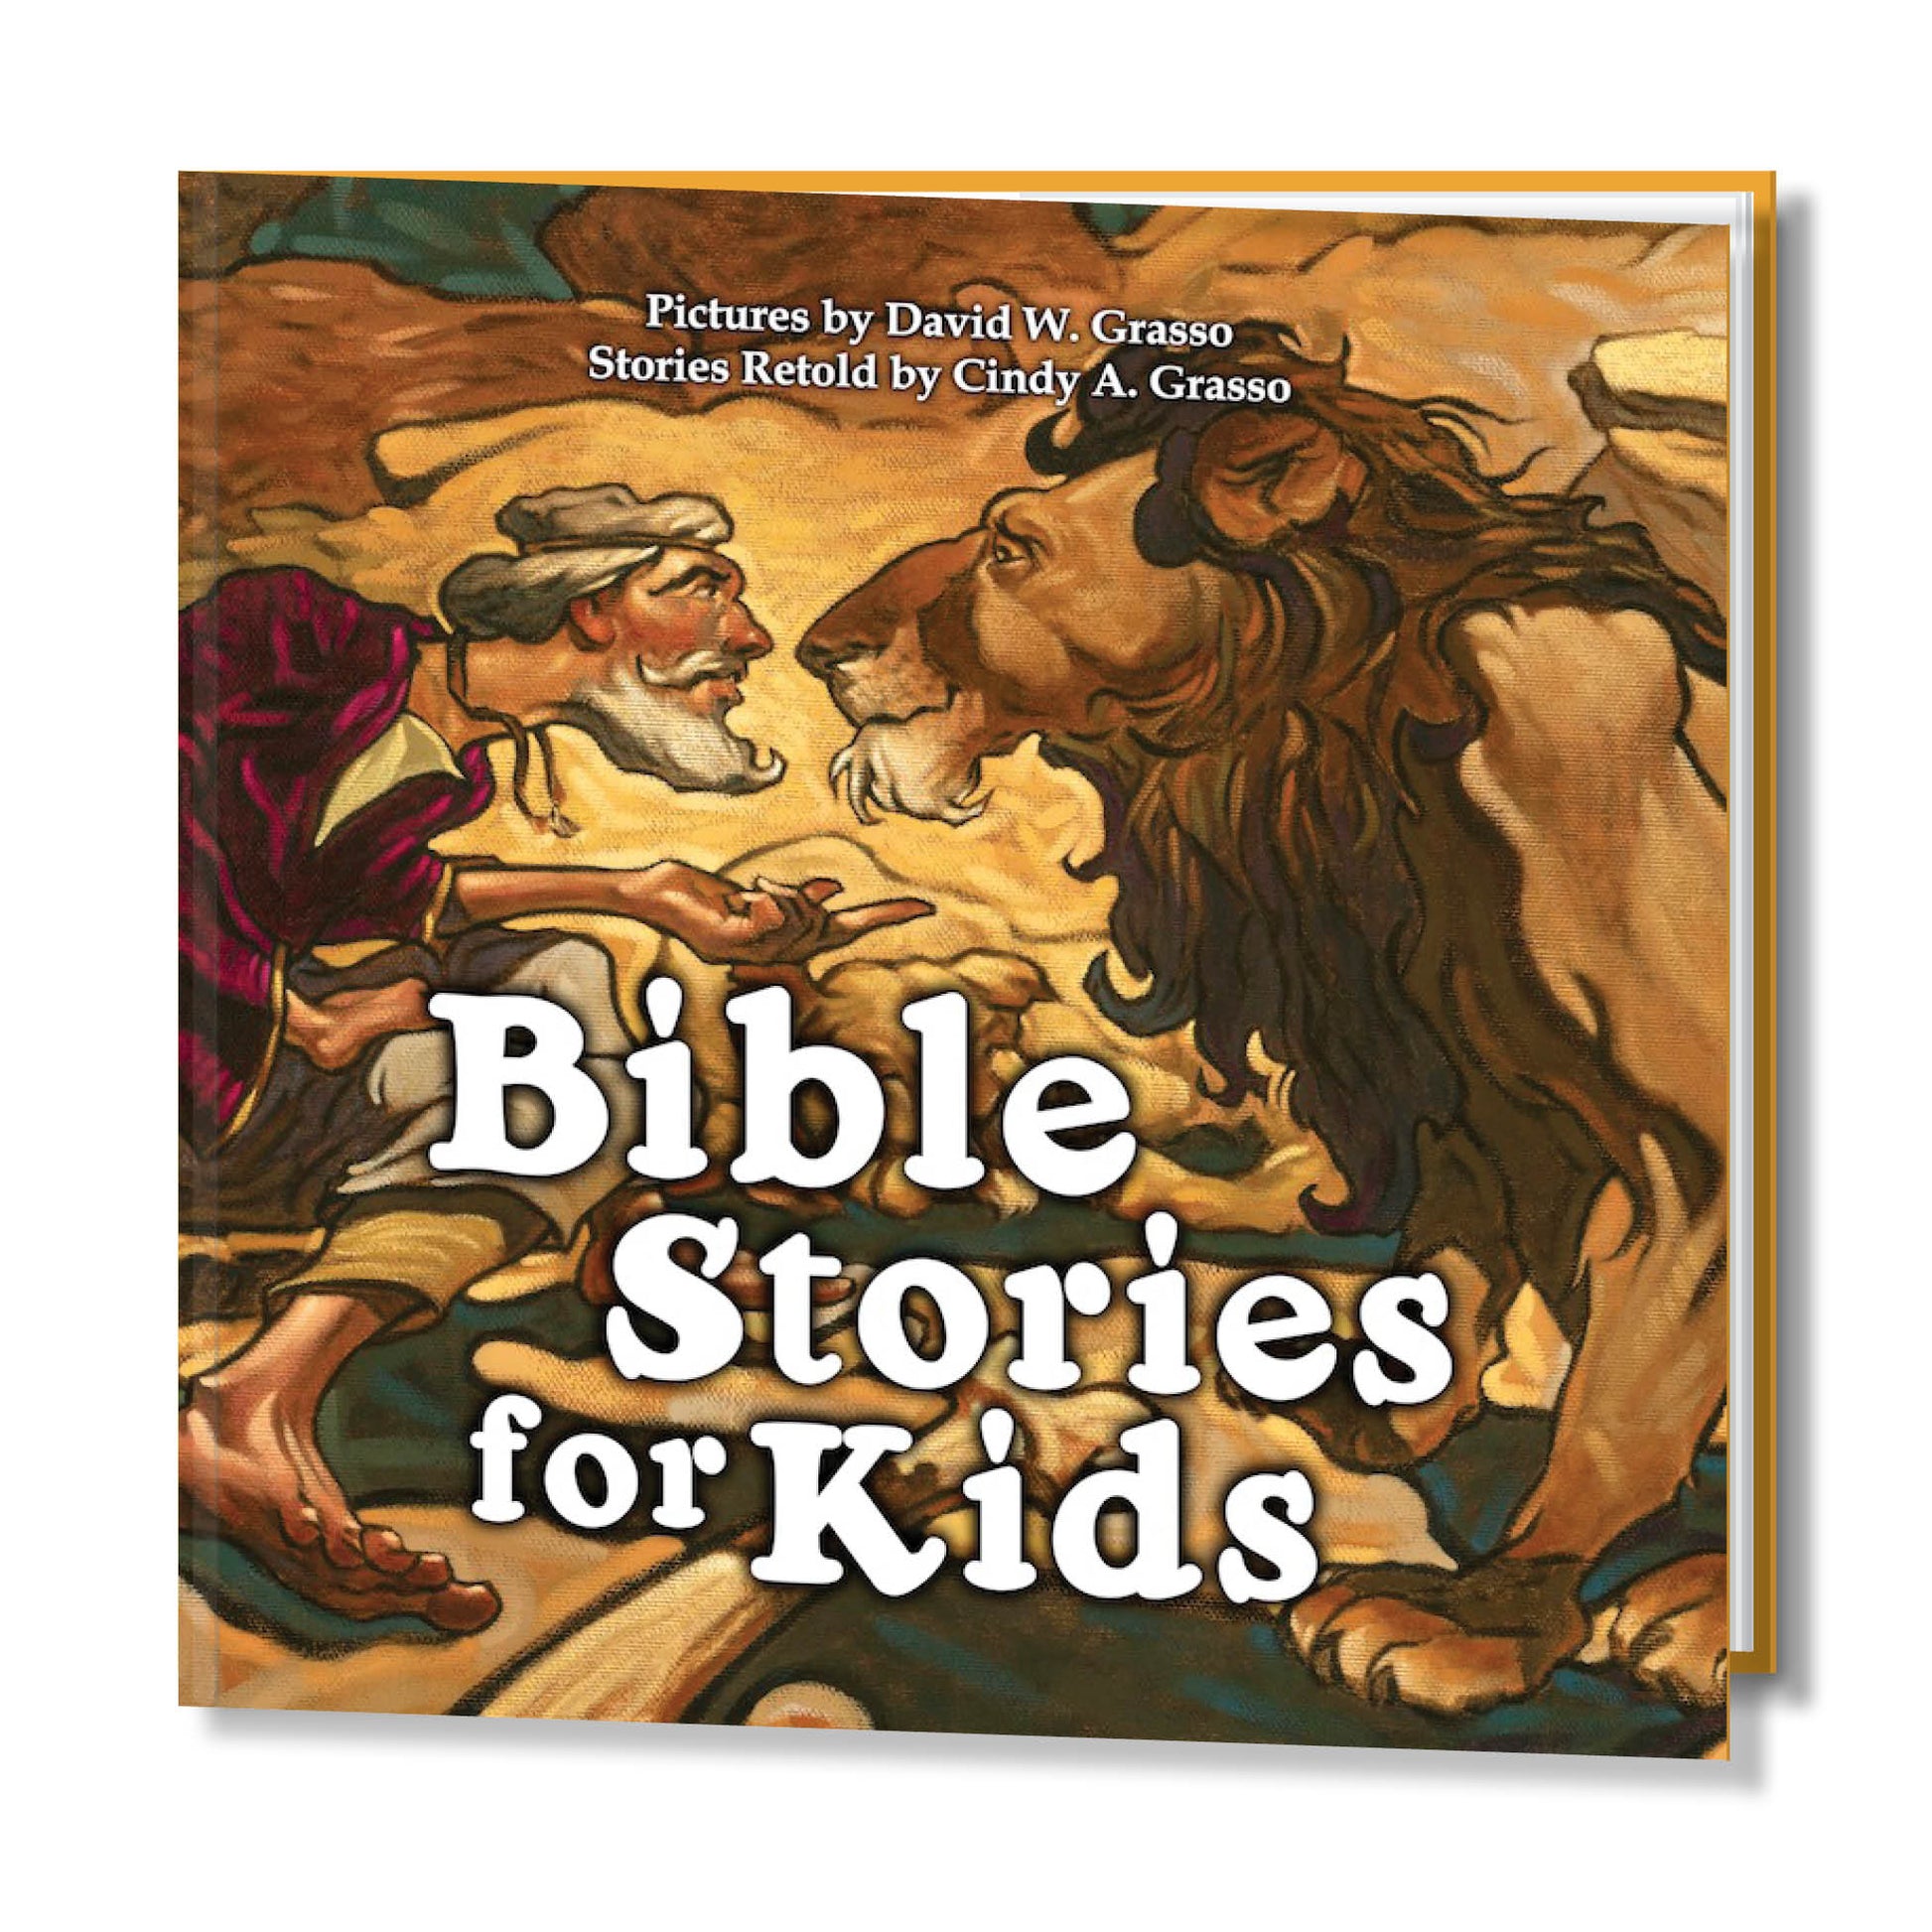 This 80 page, high-quality, custom-run, children's book is filled with adventure and intrigue, humor and surprise that will engage children young and old alike. Bible Stories For Kids brings timeless Old and New Testament stories to life in a fresh, fun, and colorful way! 